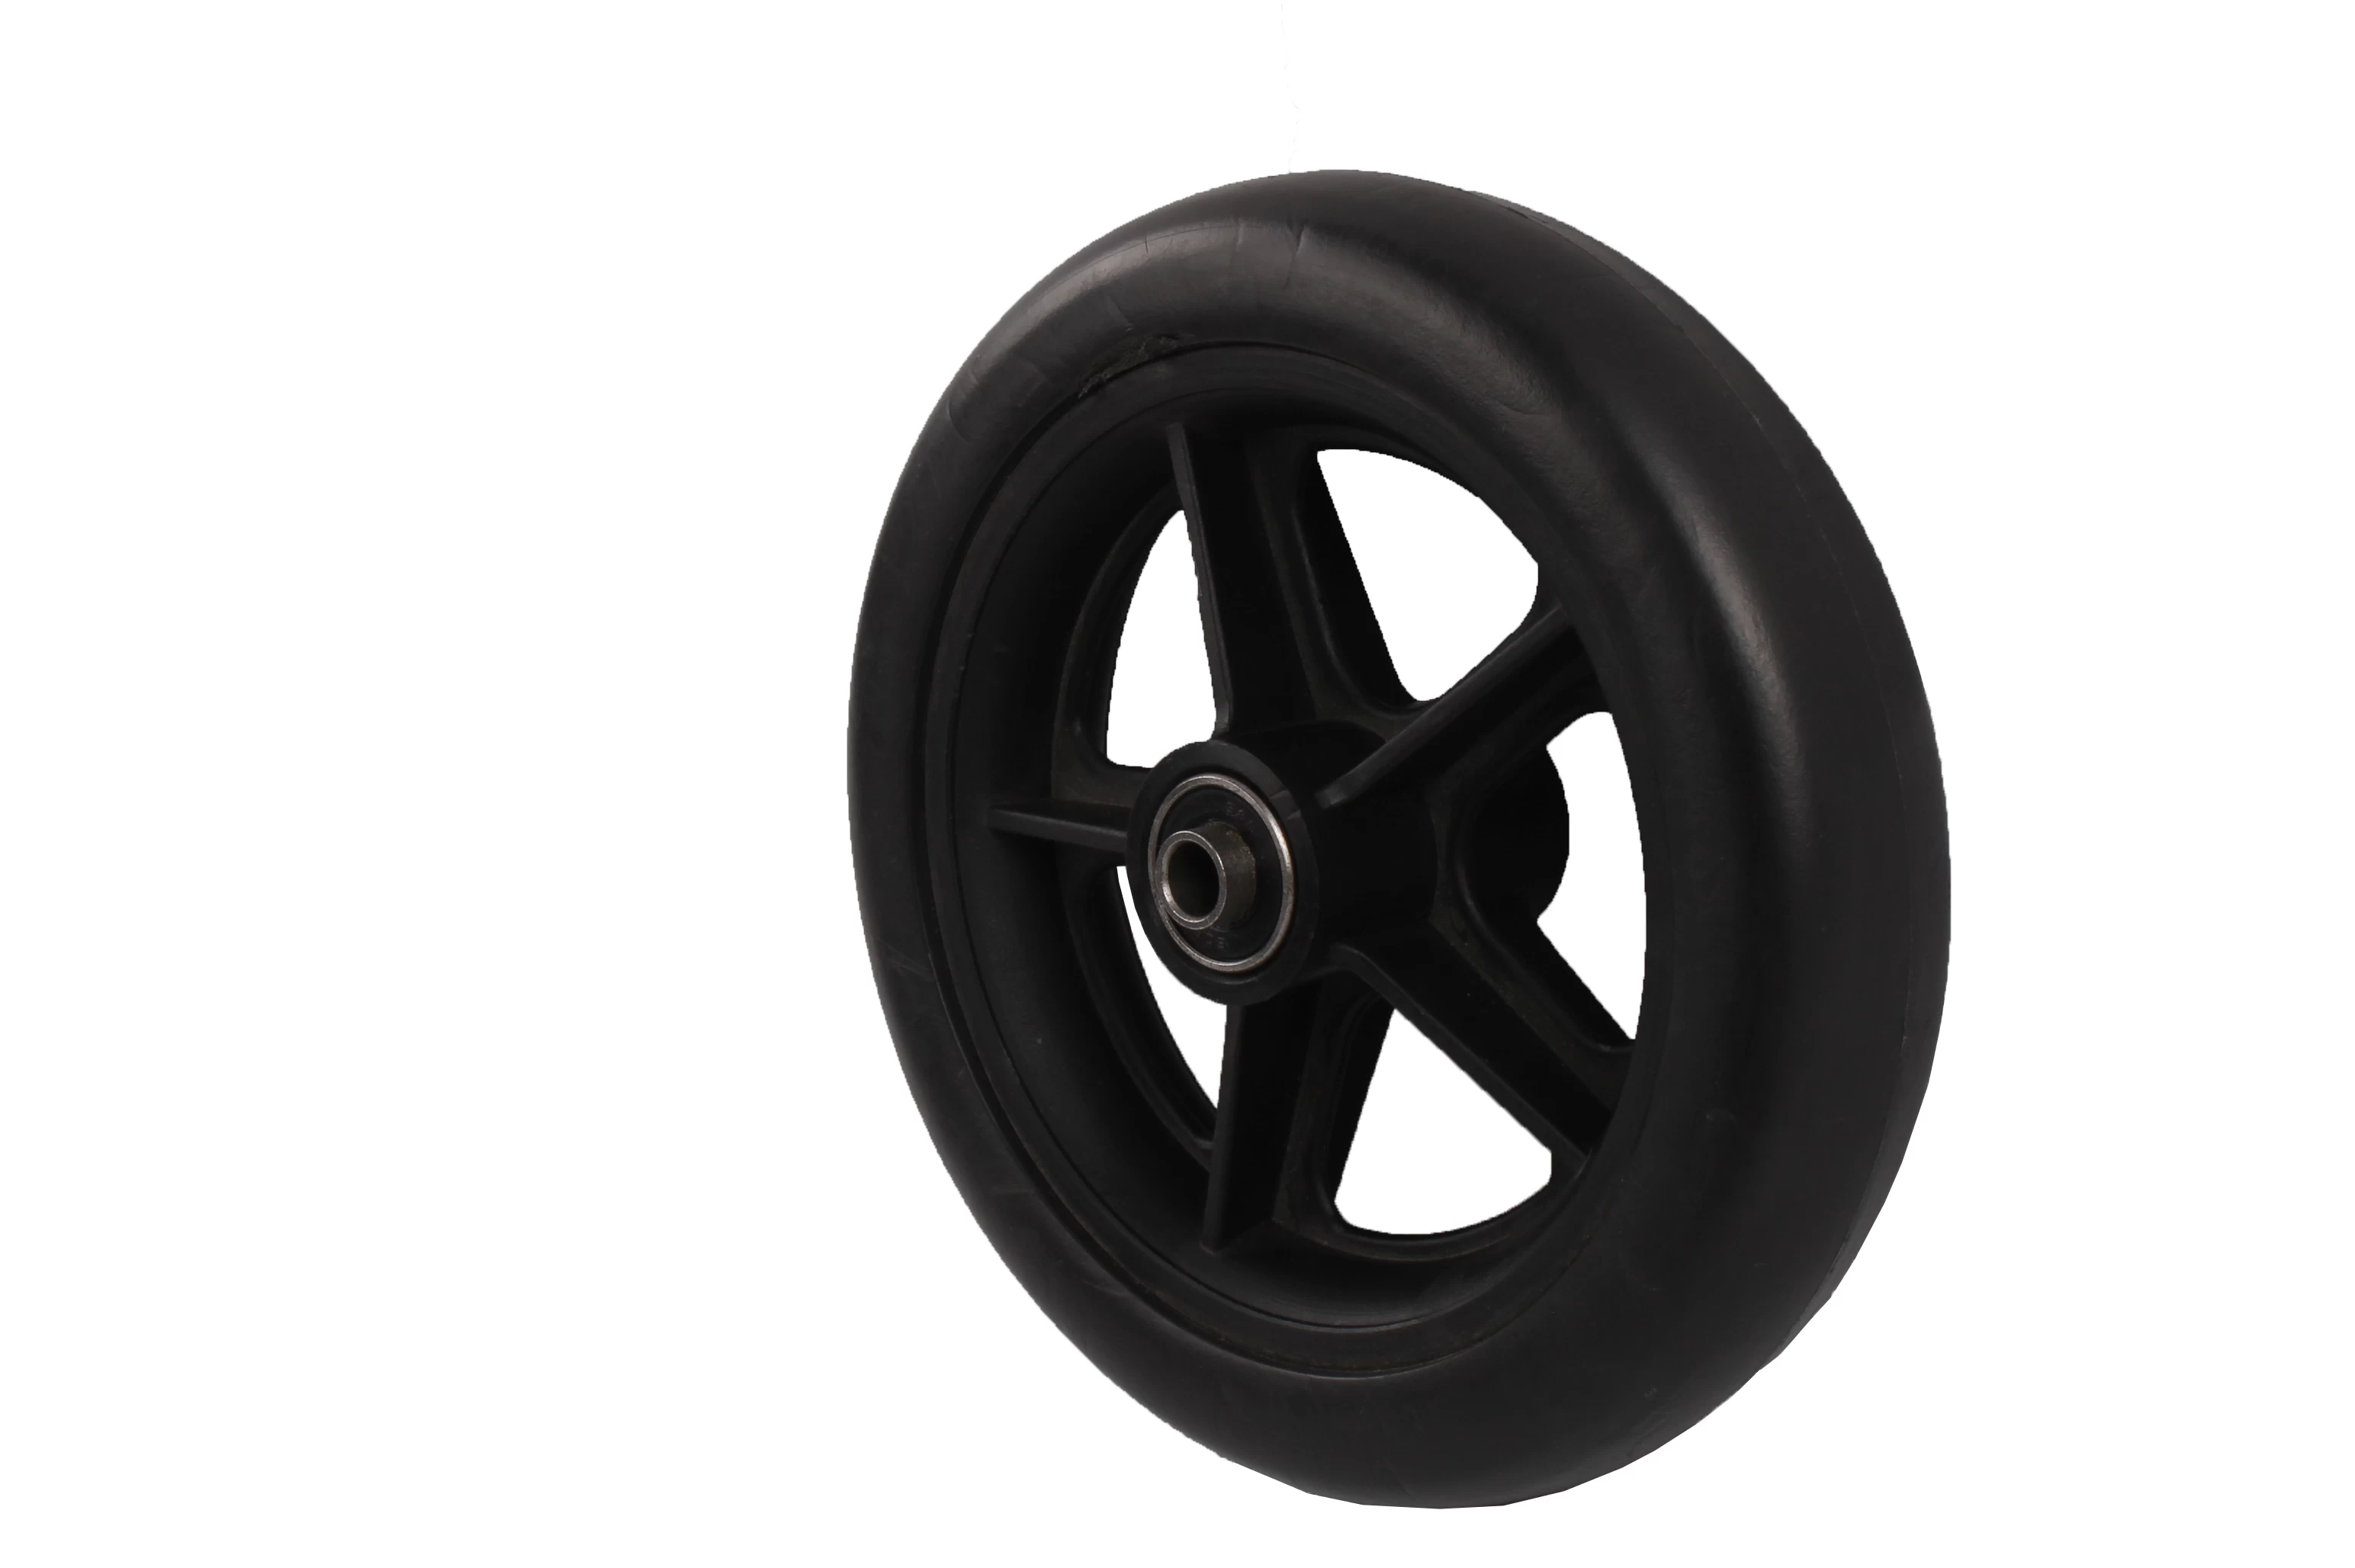 China made hight quality wheelchair tire, buggy wheel, bike tire, China Polyurethane Elastomer Products Suppliers